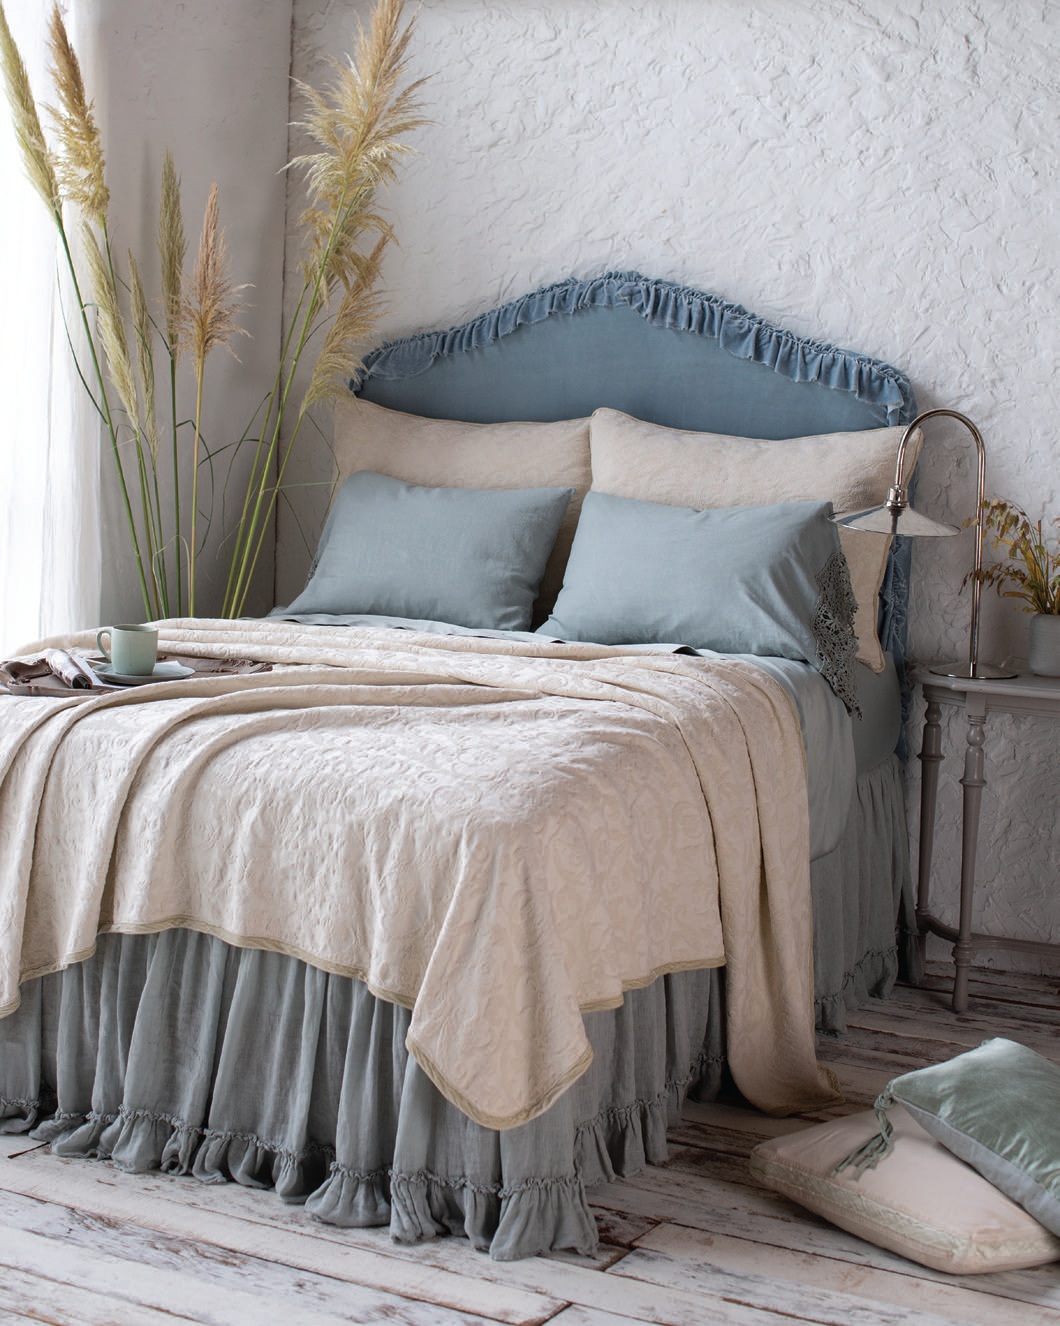 The collection includes 600-thread-count bedding LINEN PHOTO COURTESY OF BELLA NOTTE